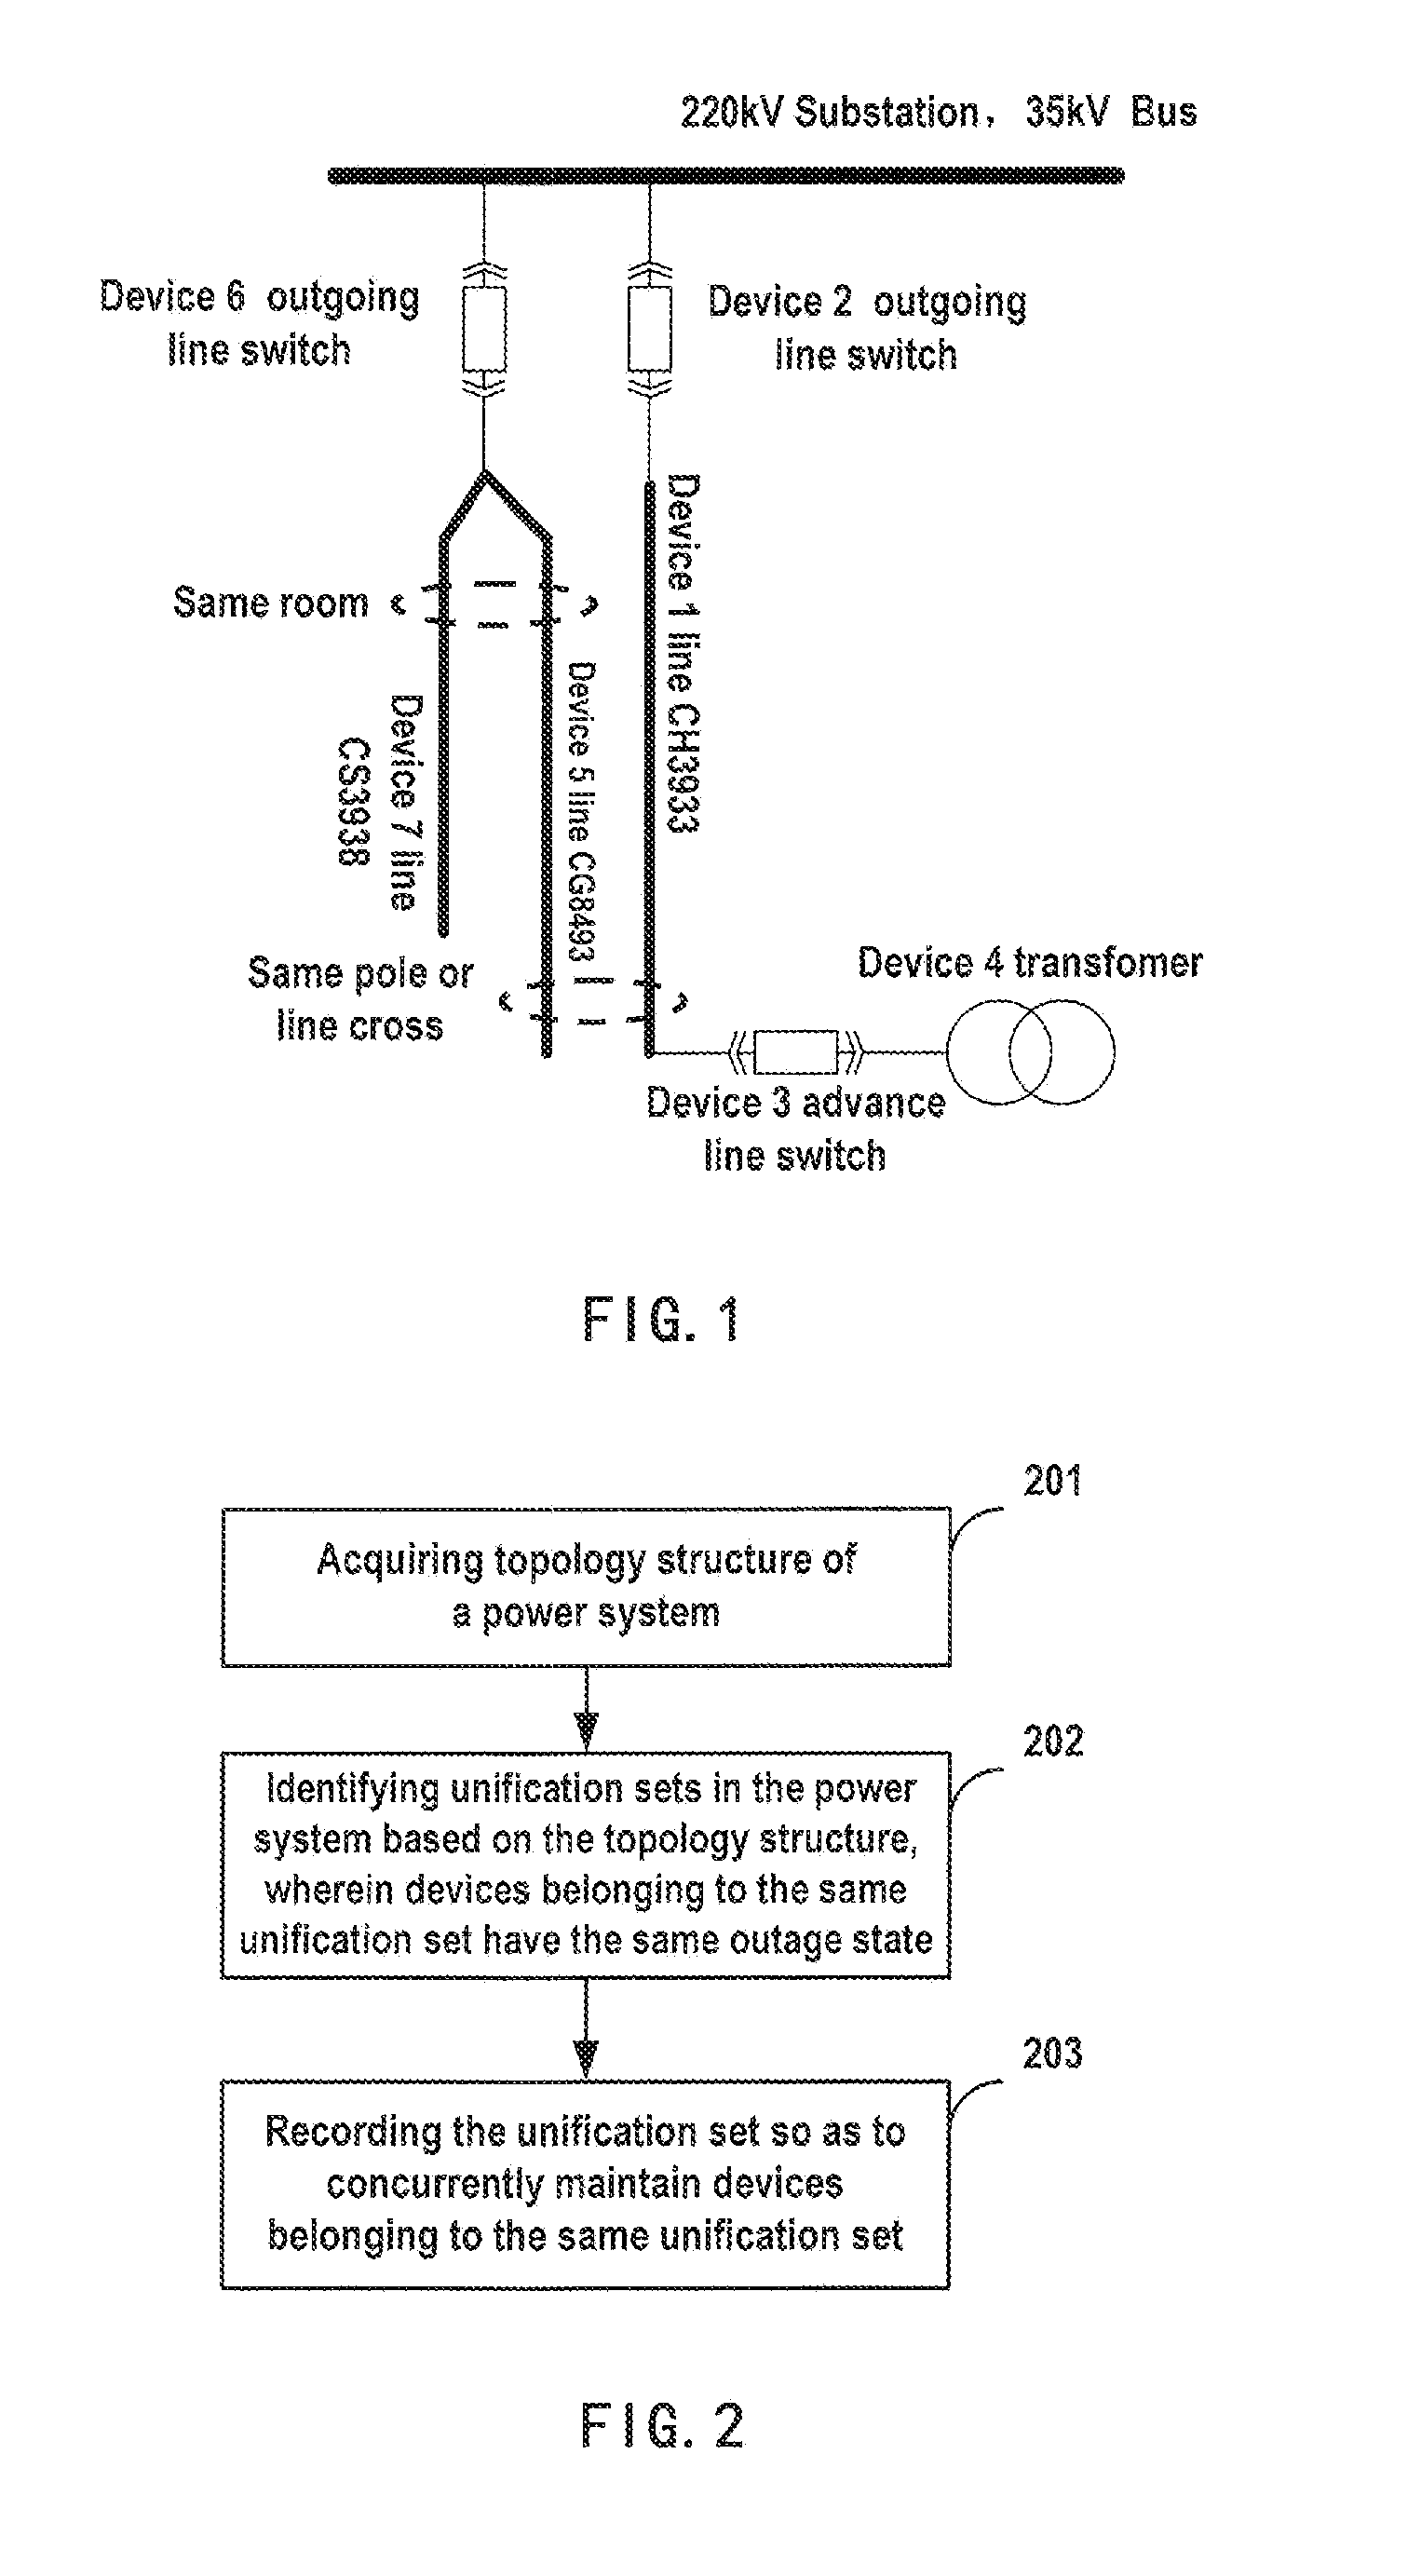 Method and apparatus for processing power system topology structure information